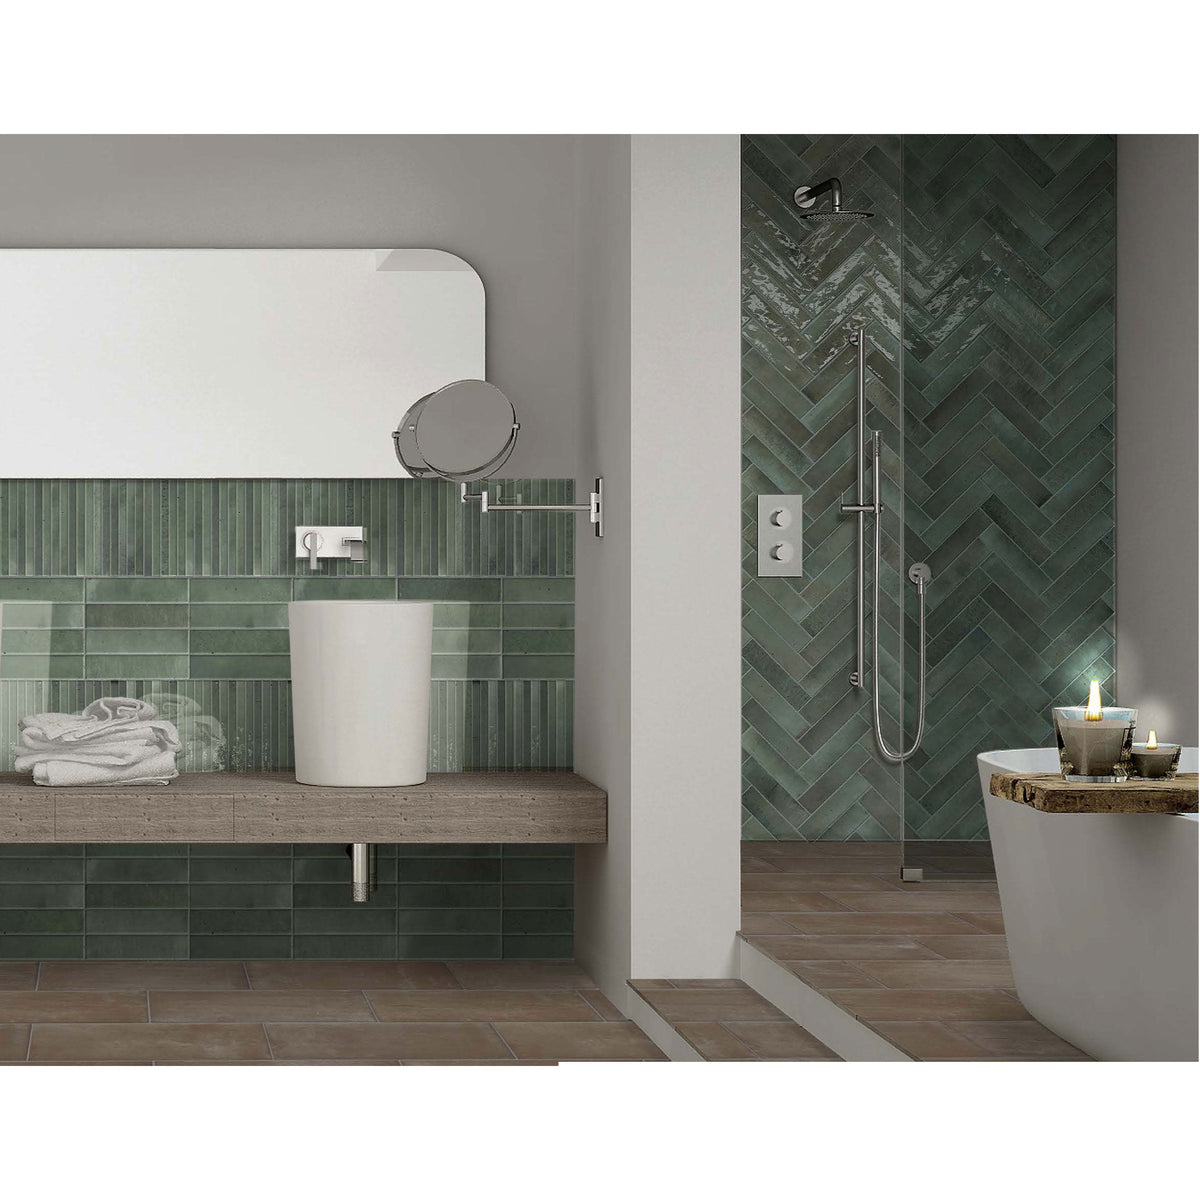 Cobsa - Homey Series 5 in. x 10 in. Porcelain Subway Tile - Forest Installed